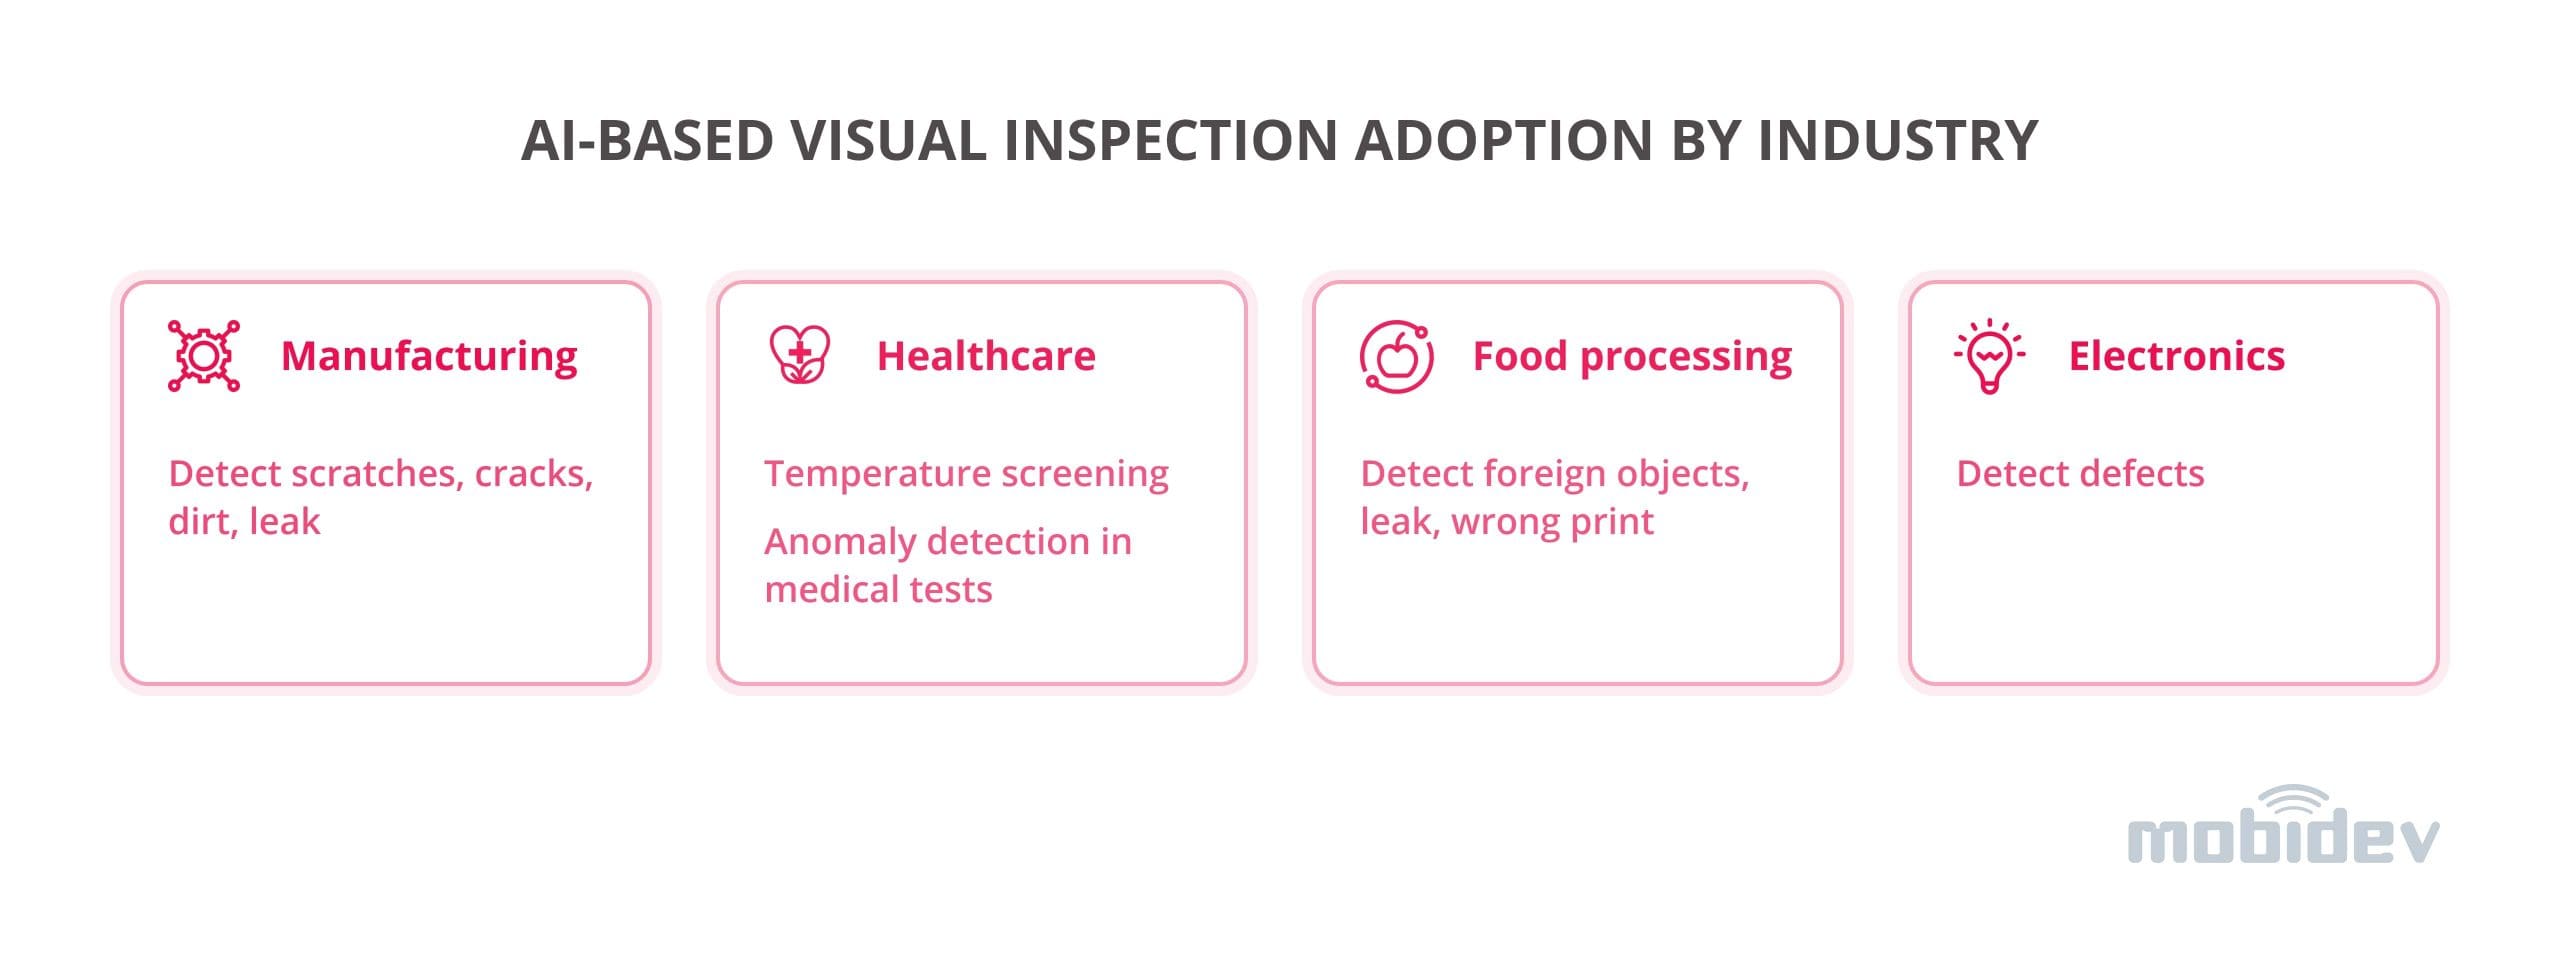 Use cases of AI inspection